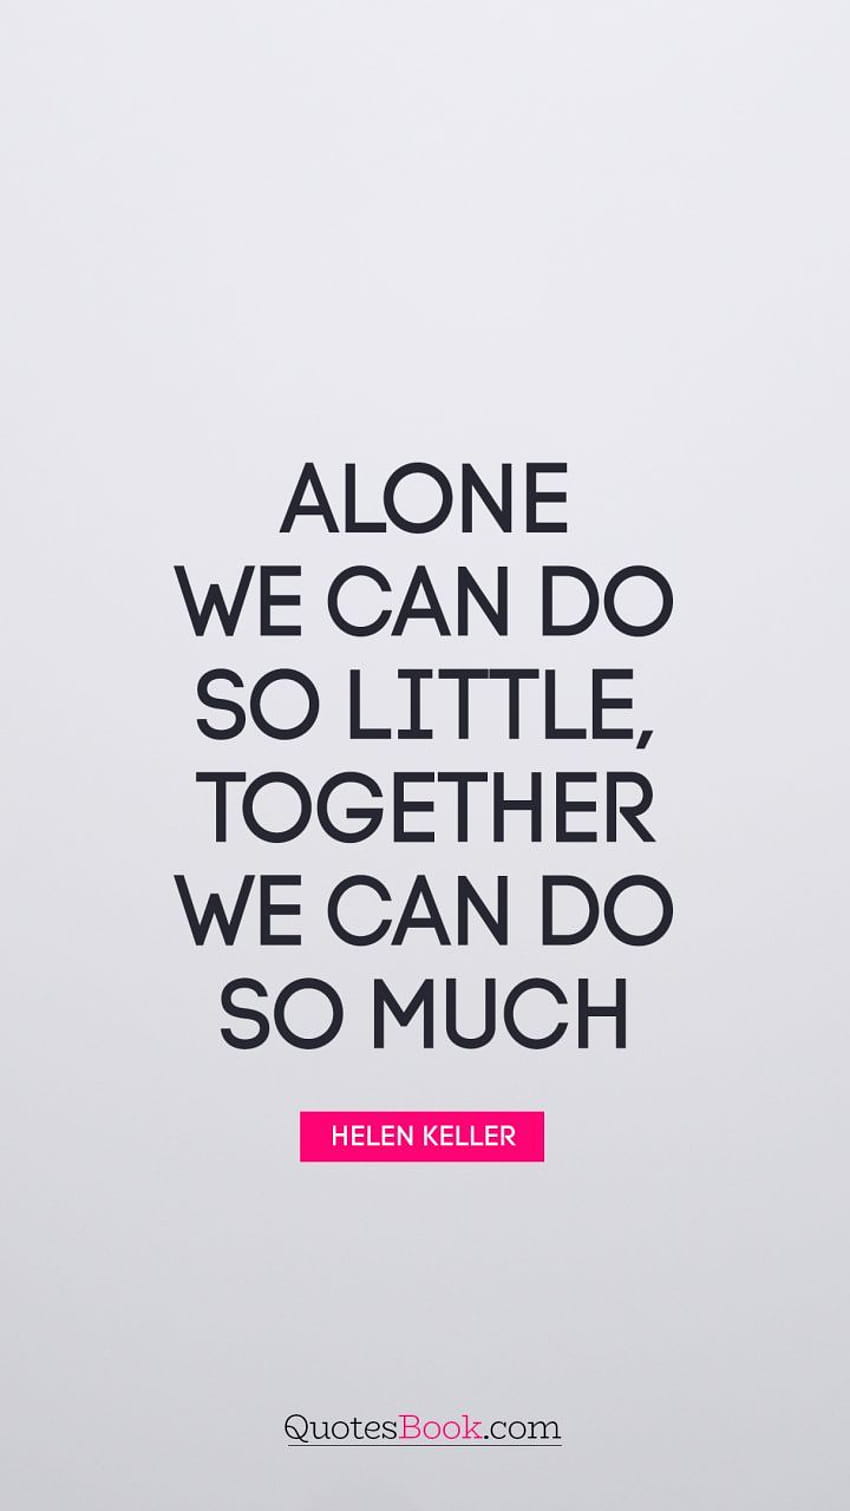 Quotes ~ Helen Keller Quote E2809calone We Can Do So Little Together Much Quotefancy Alone 41 Alone We Can Do So Little Helen Keller Inspirations HD phone wallpaper